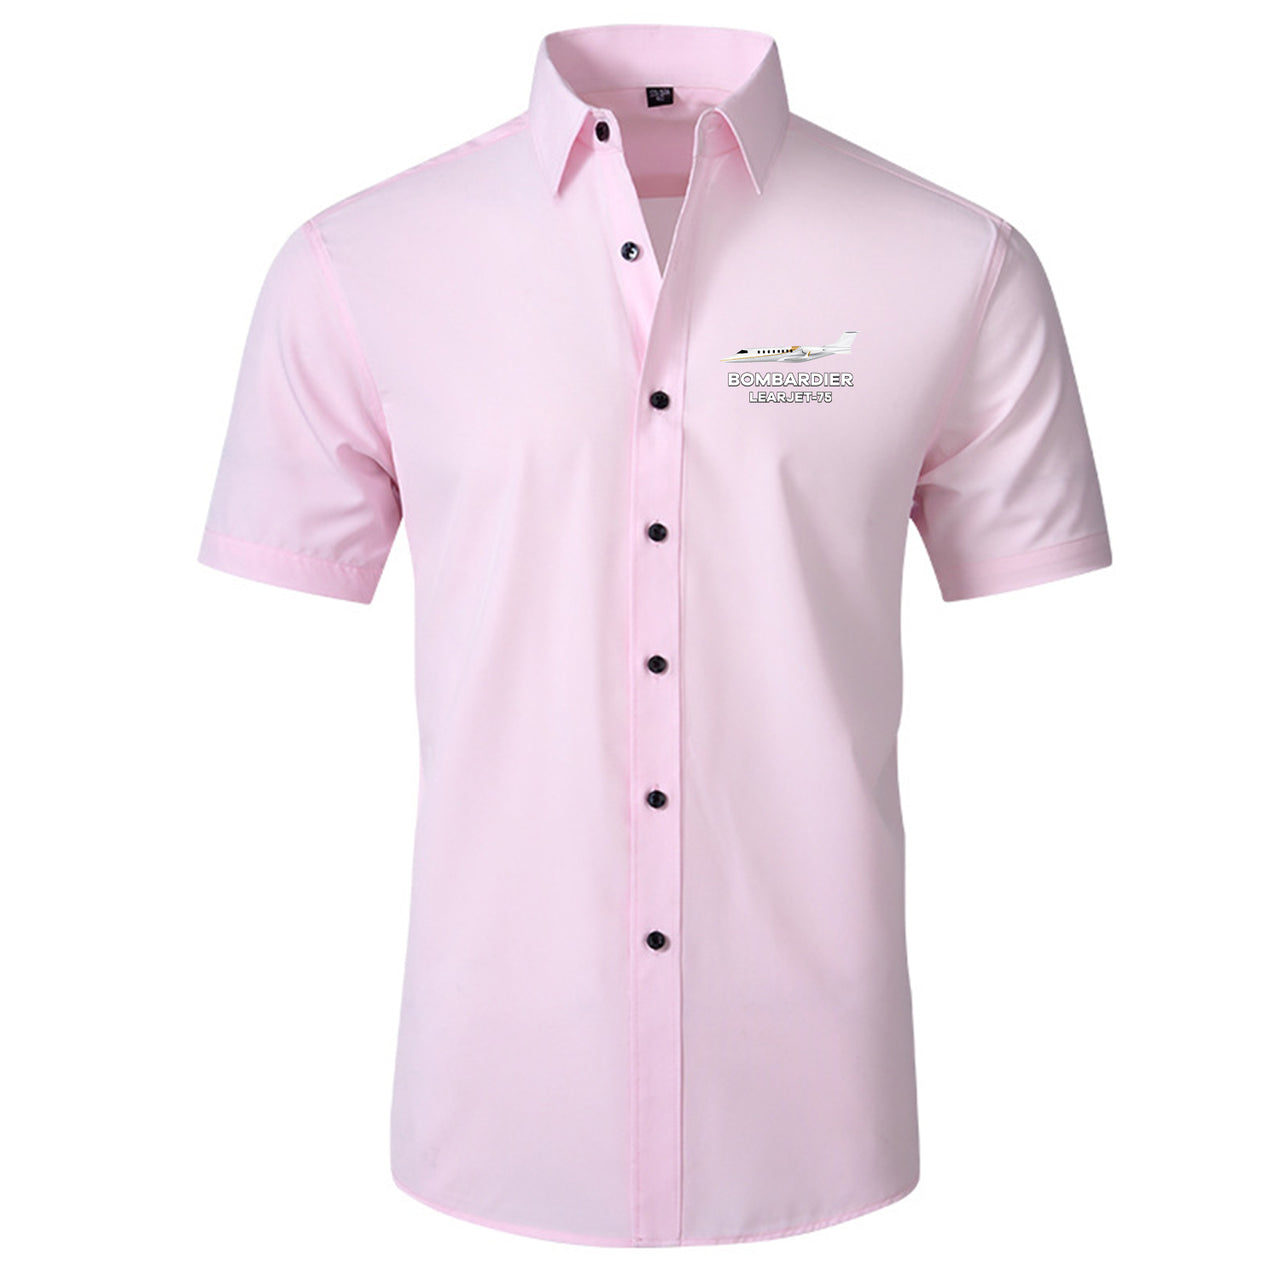 The Bombardier Learjet 75 Designed Short Sleeve Shirts